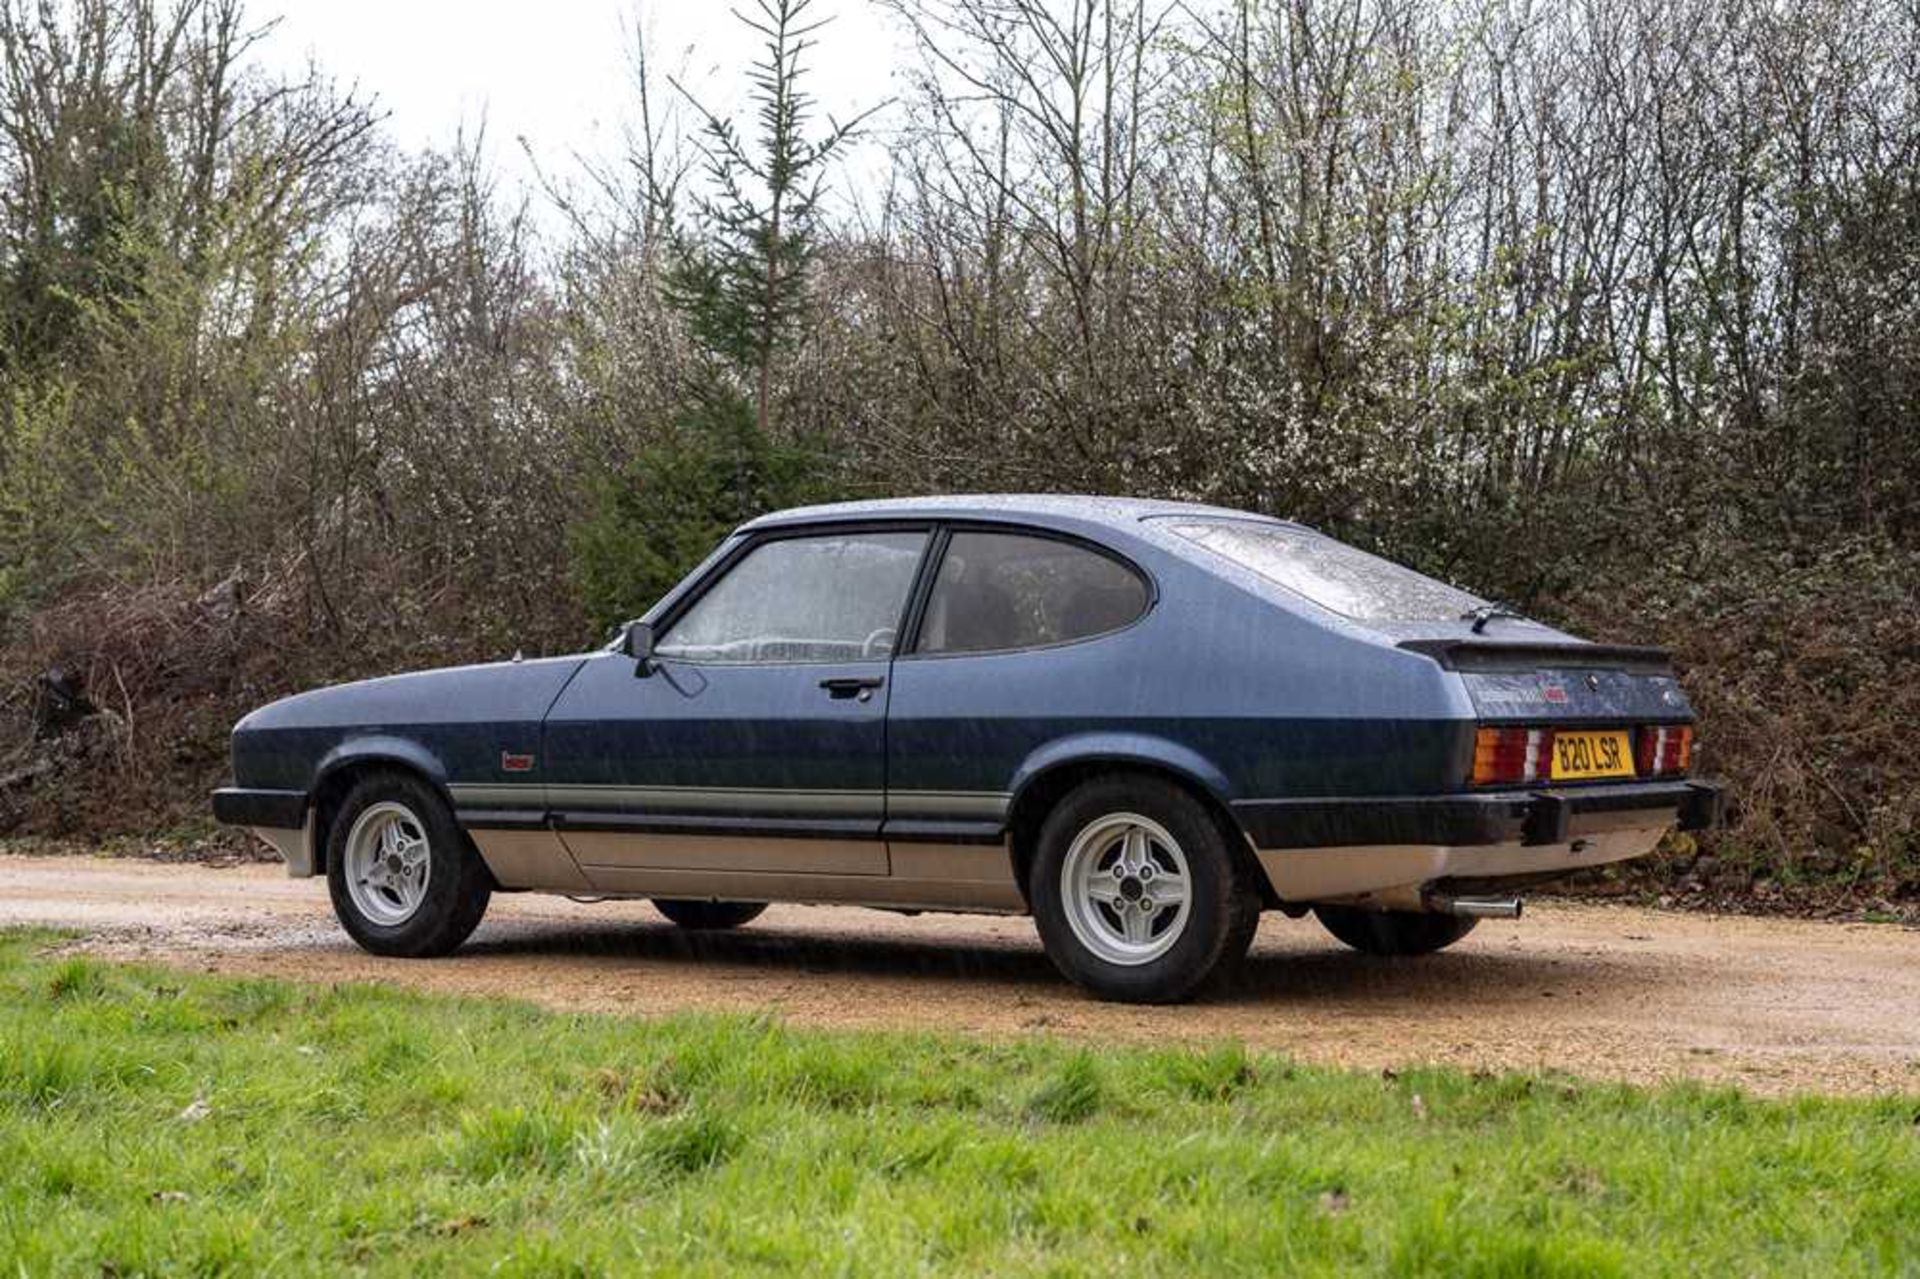 1985 Ford Capri Laser 2.0 Litre Warranted 55,300 miles from new - Image 8 of 67